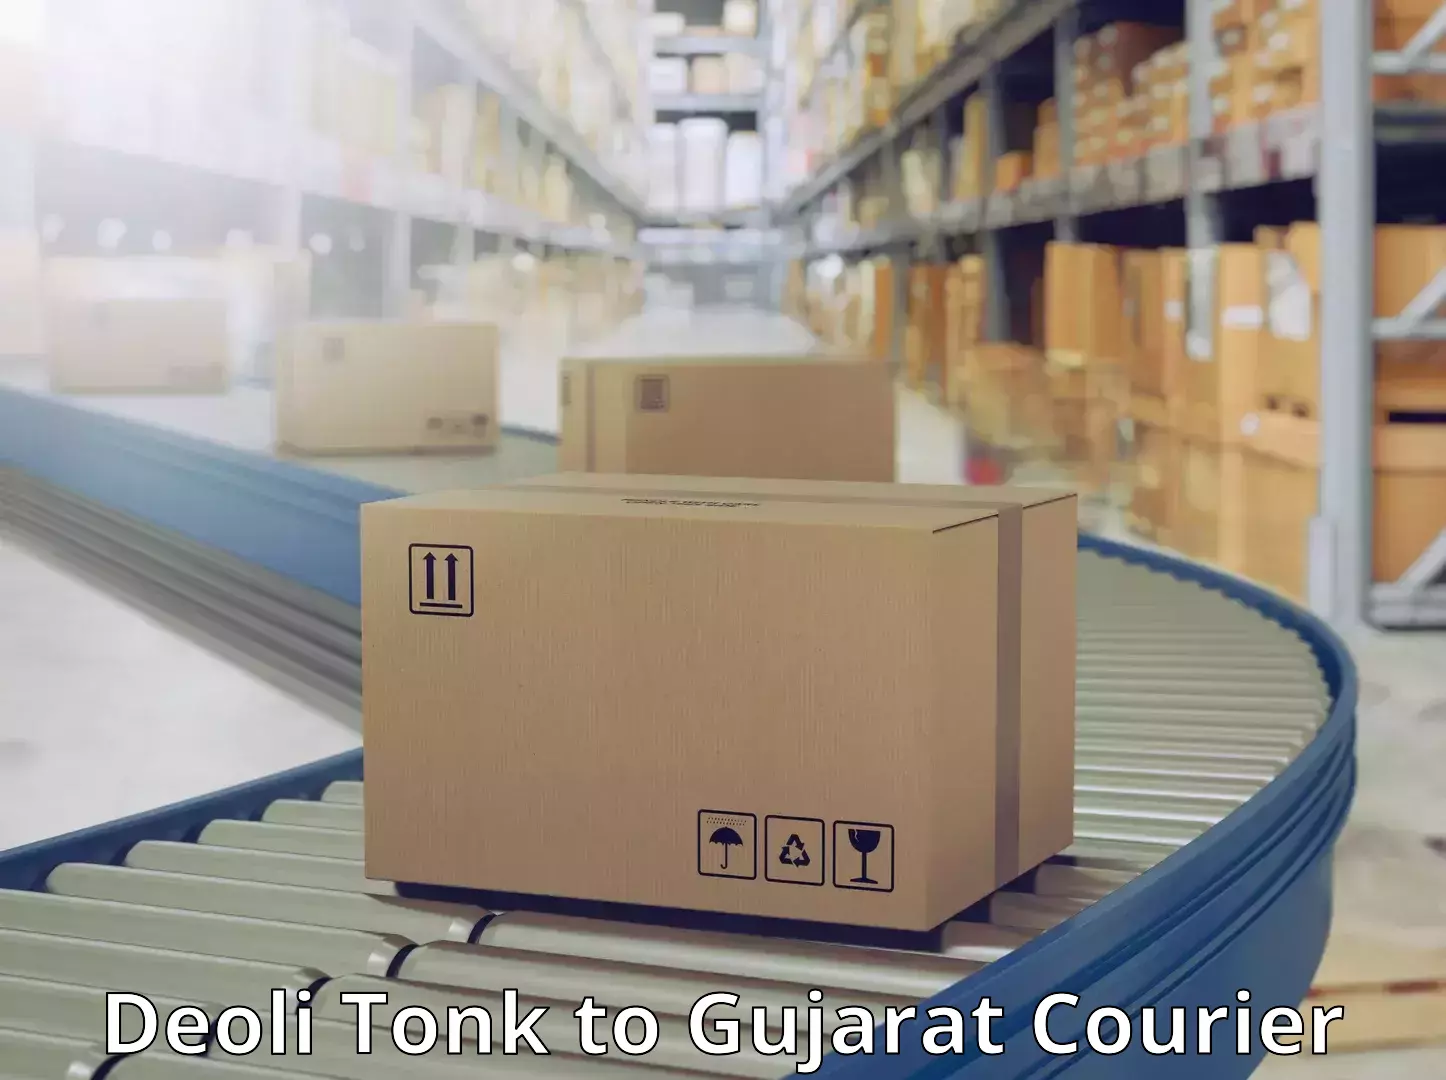 24-hour courier service Deoli Tonk to Bharuch